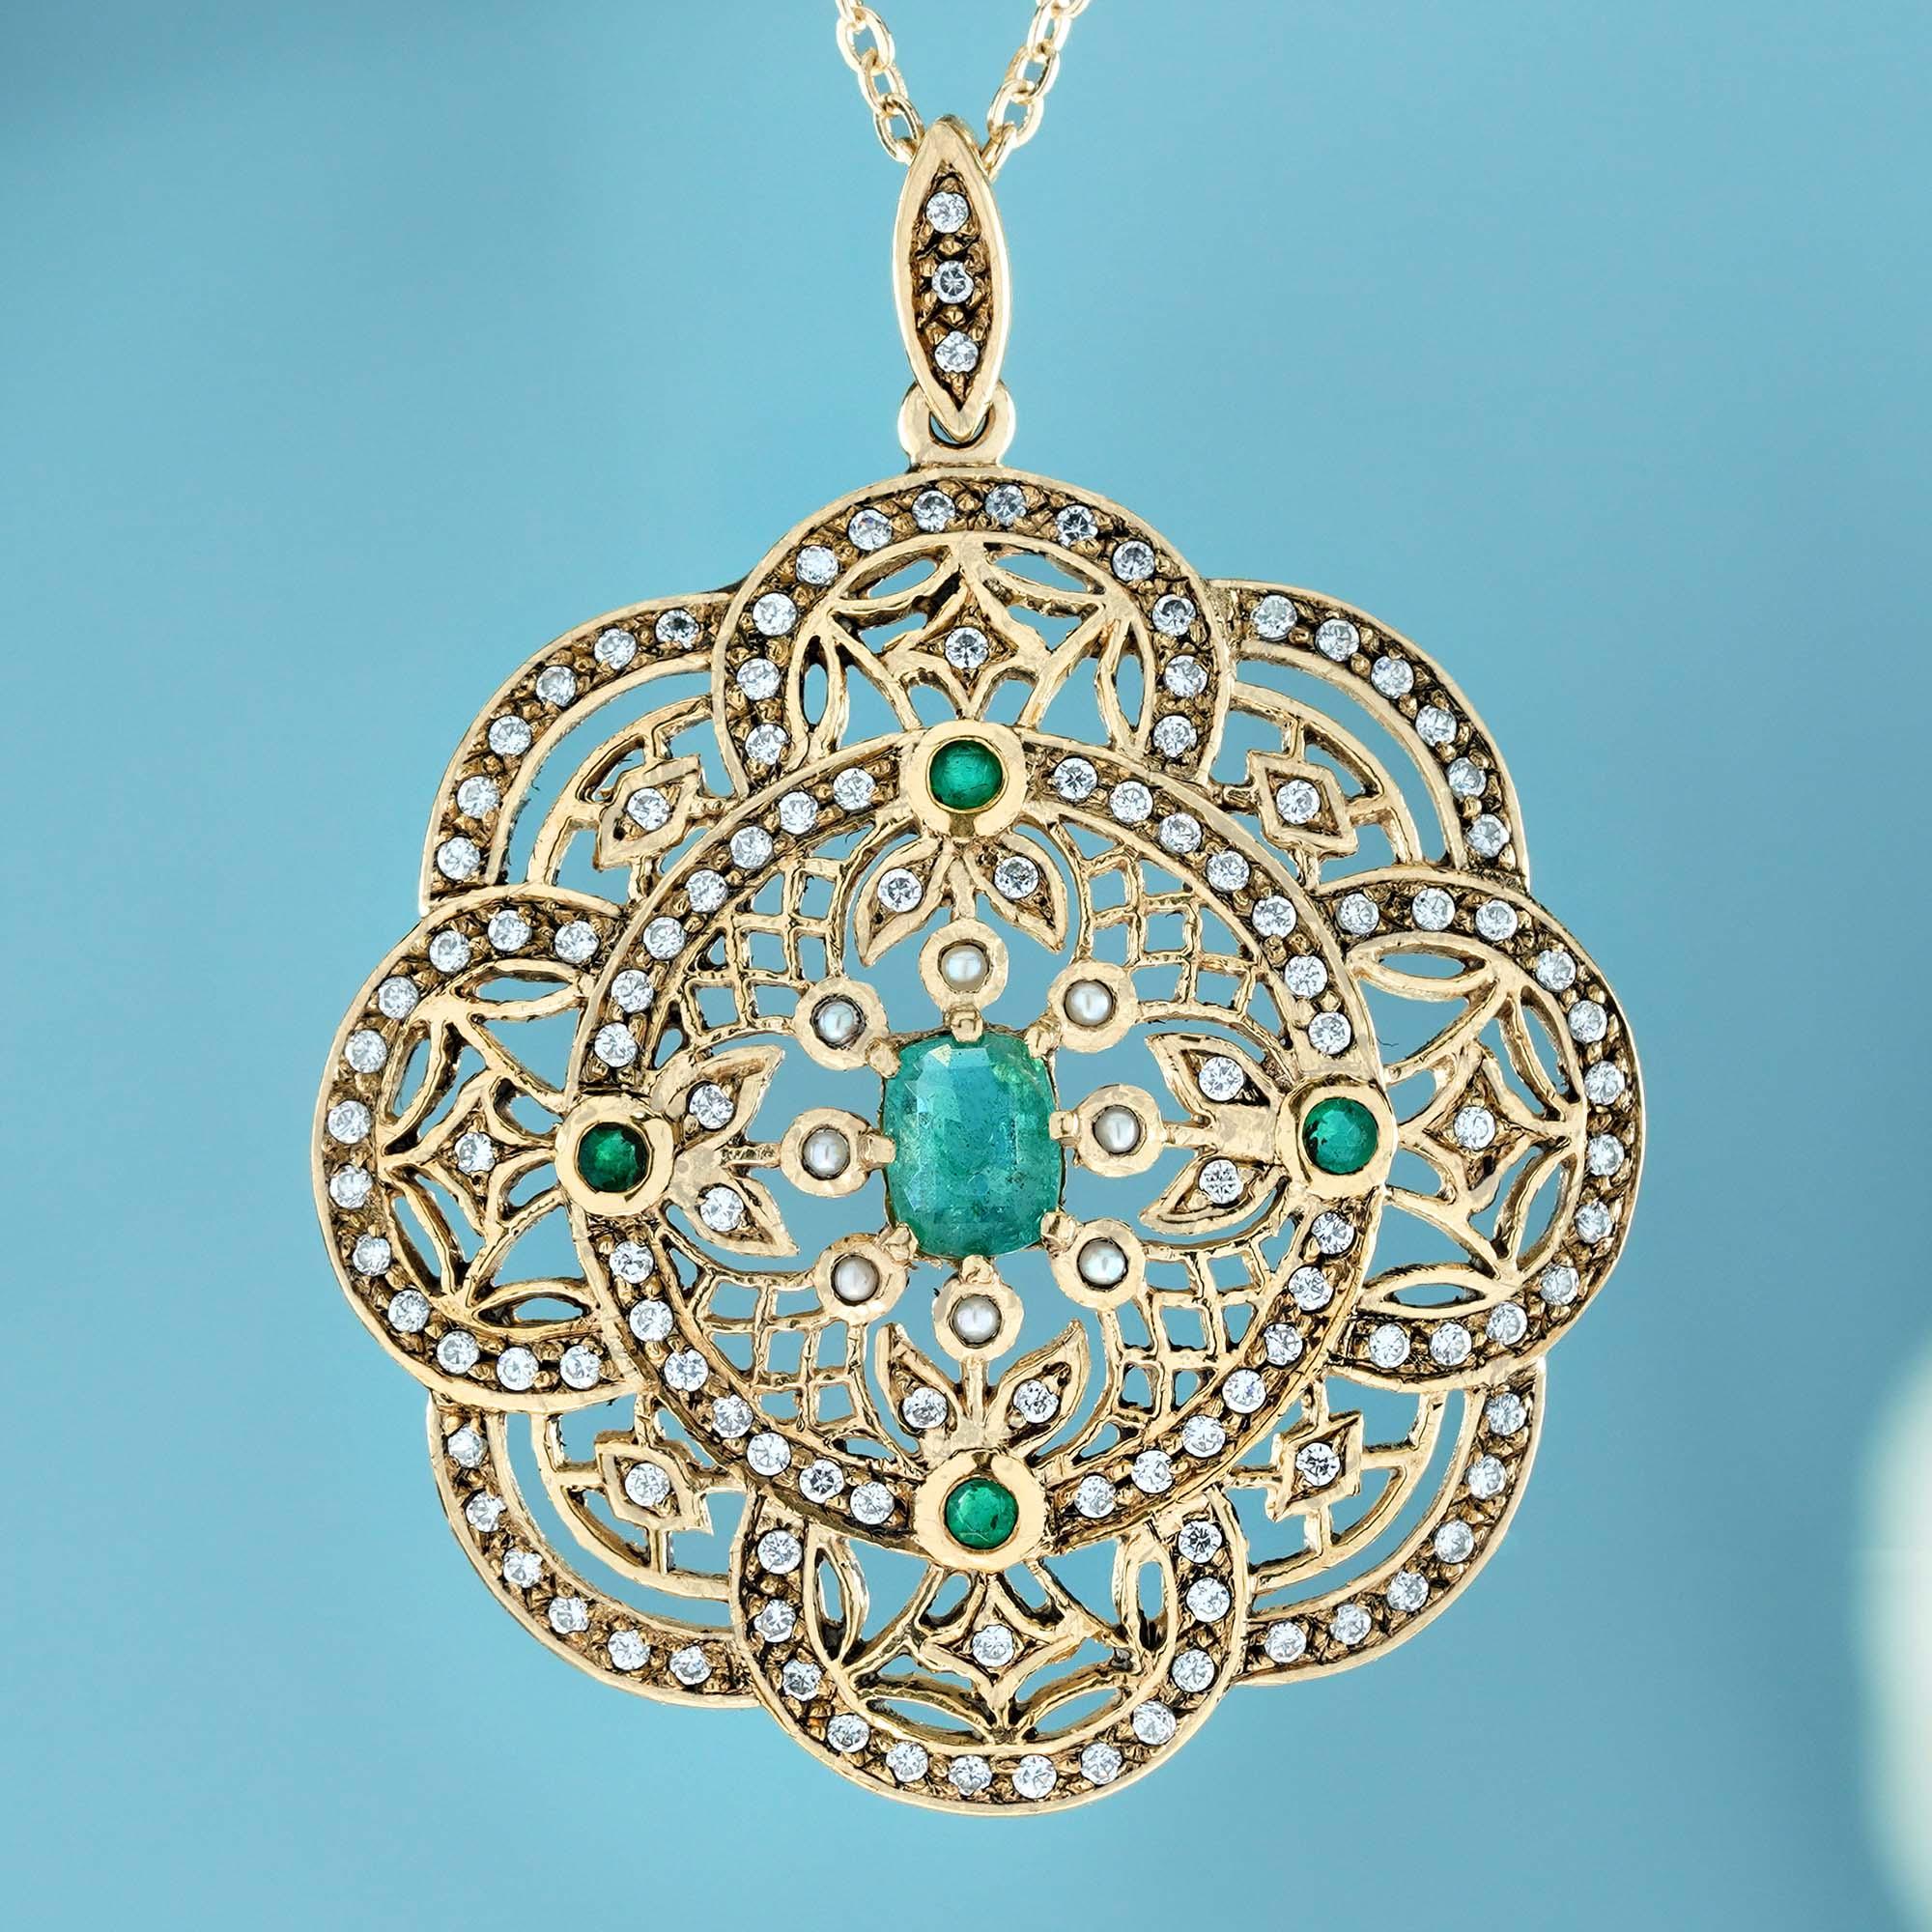 The intricate filigree setting in this exquisite pendant is a true masterpiece of jewelry craftsmanship. Delicate scrolls and swirls dance across the surface, creating a mesmerizing play of light and shadow. The centerpiece is a natural emerald in a